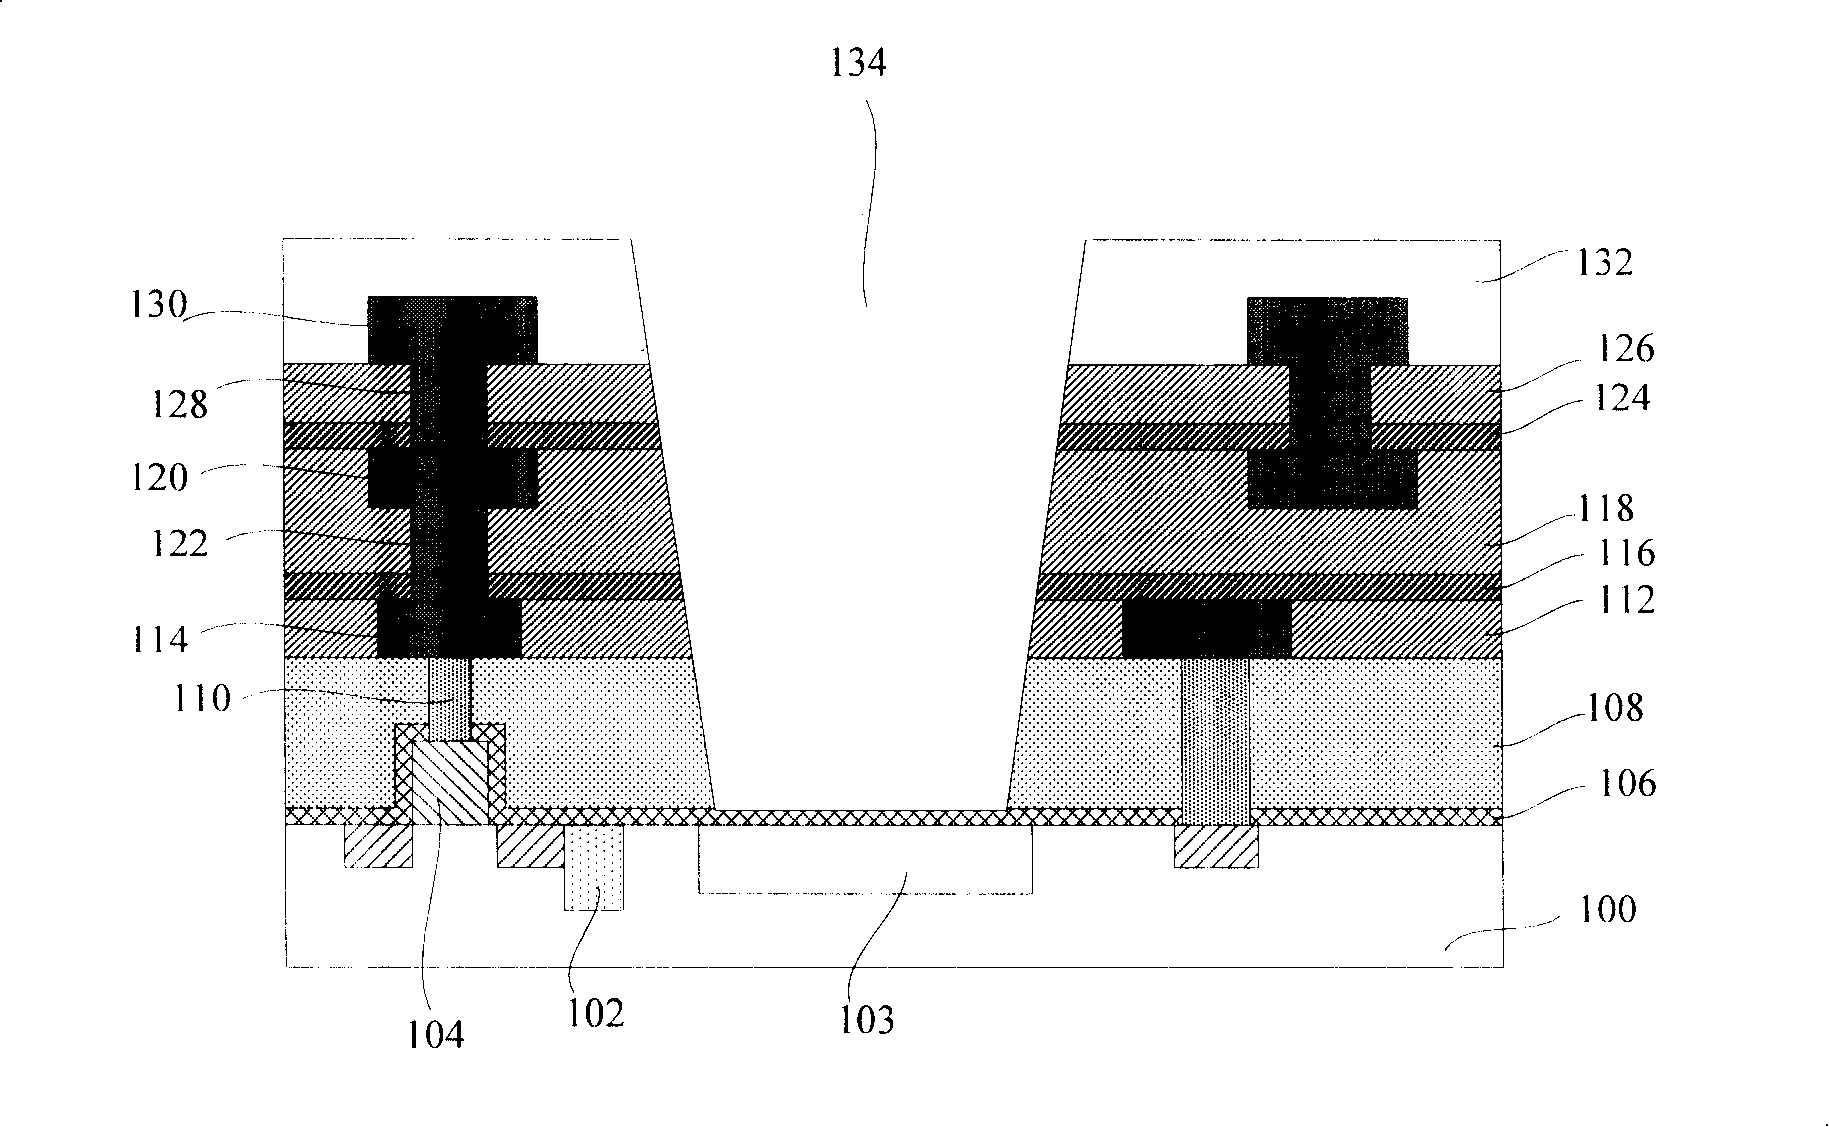 Method for manufacturing groove and its method for manufacturing image sensor